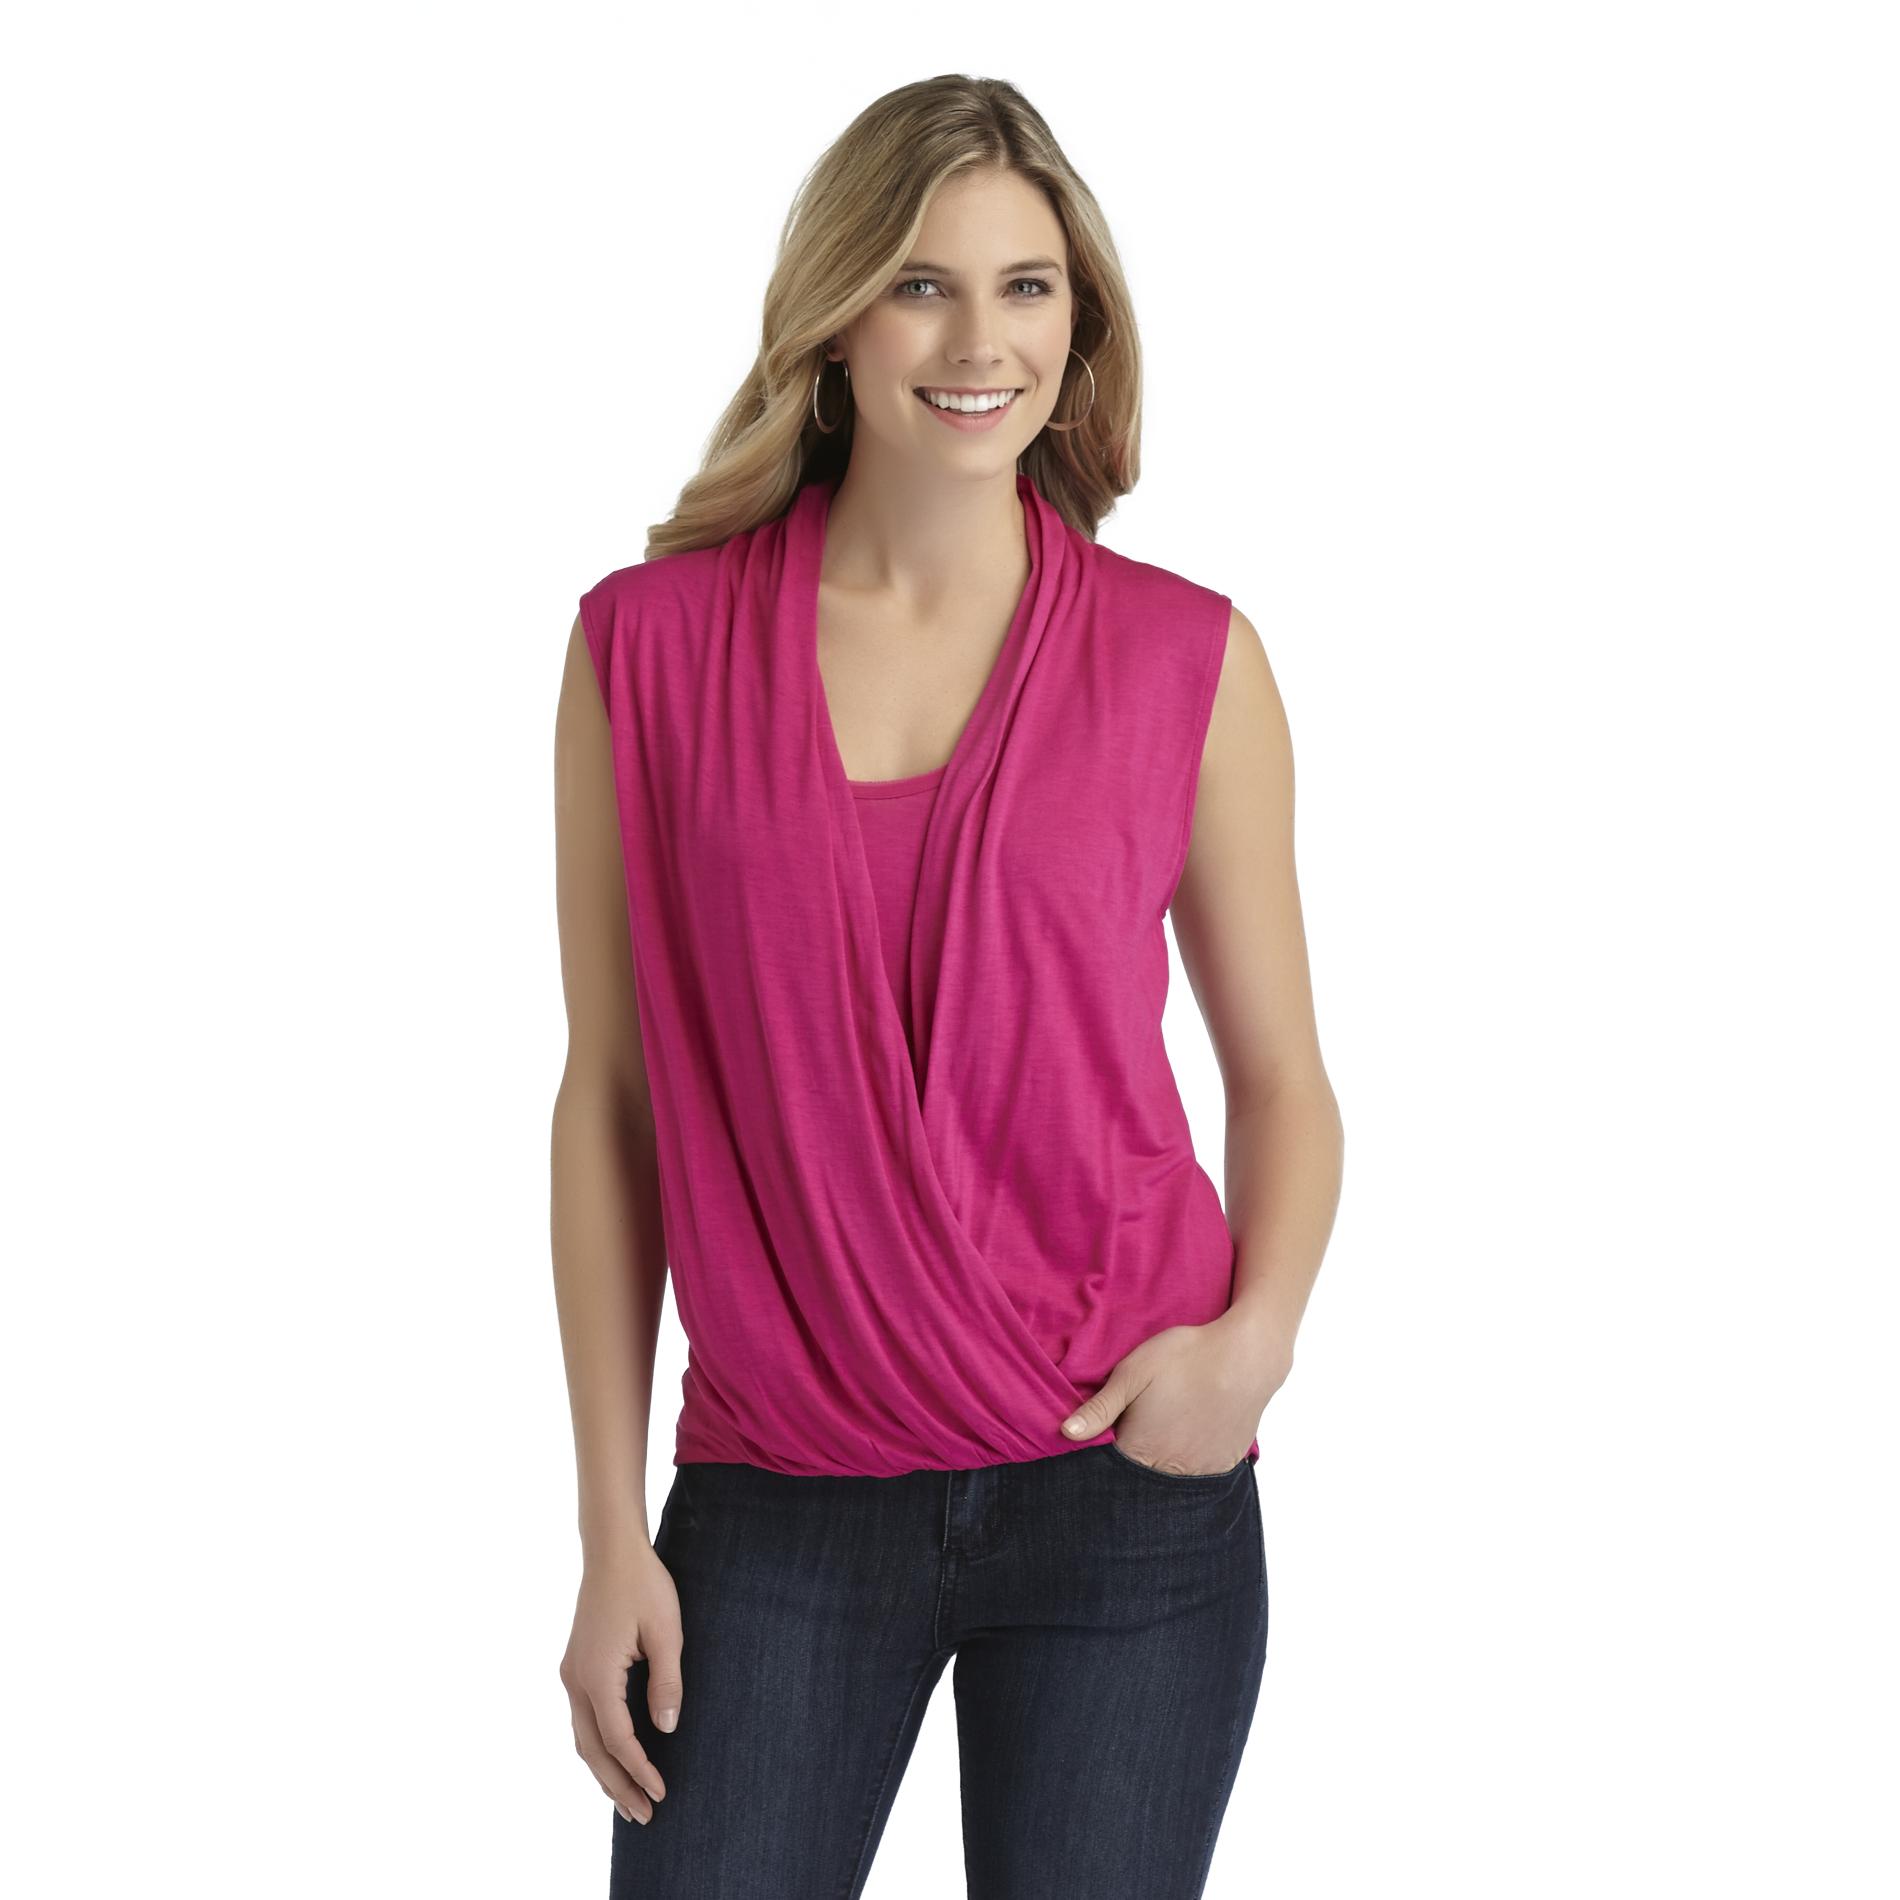 Attention Women's Layered Wrap Top